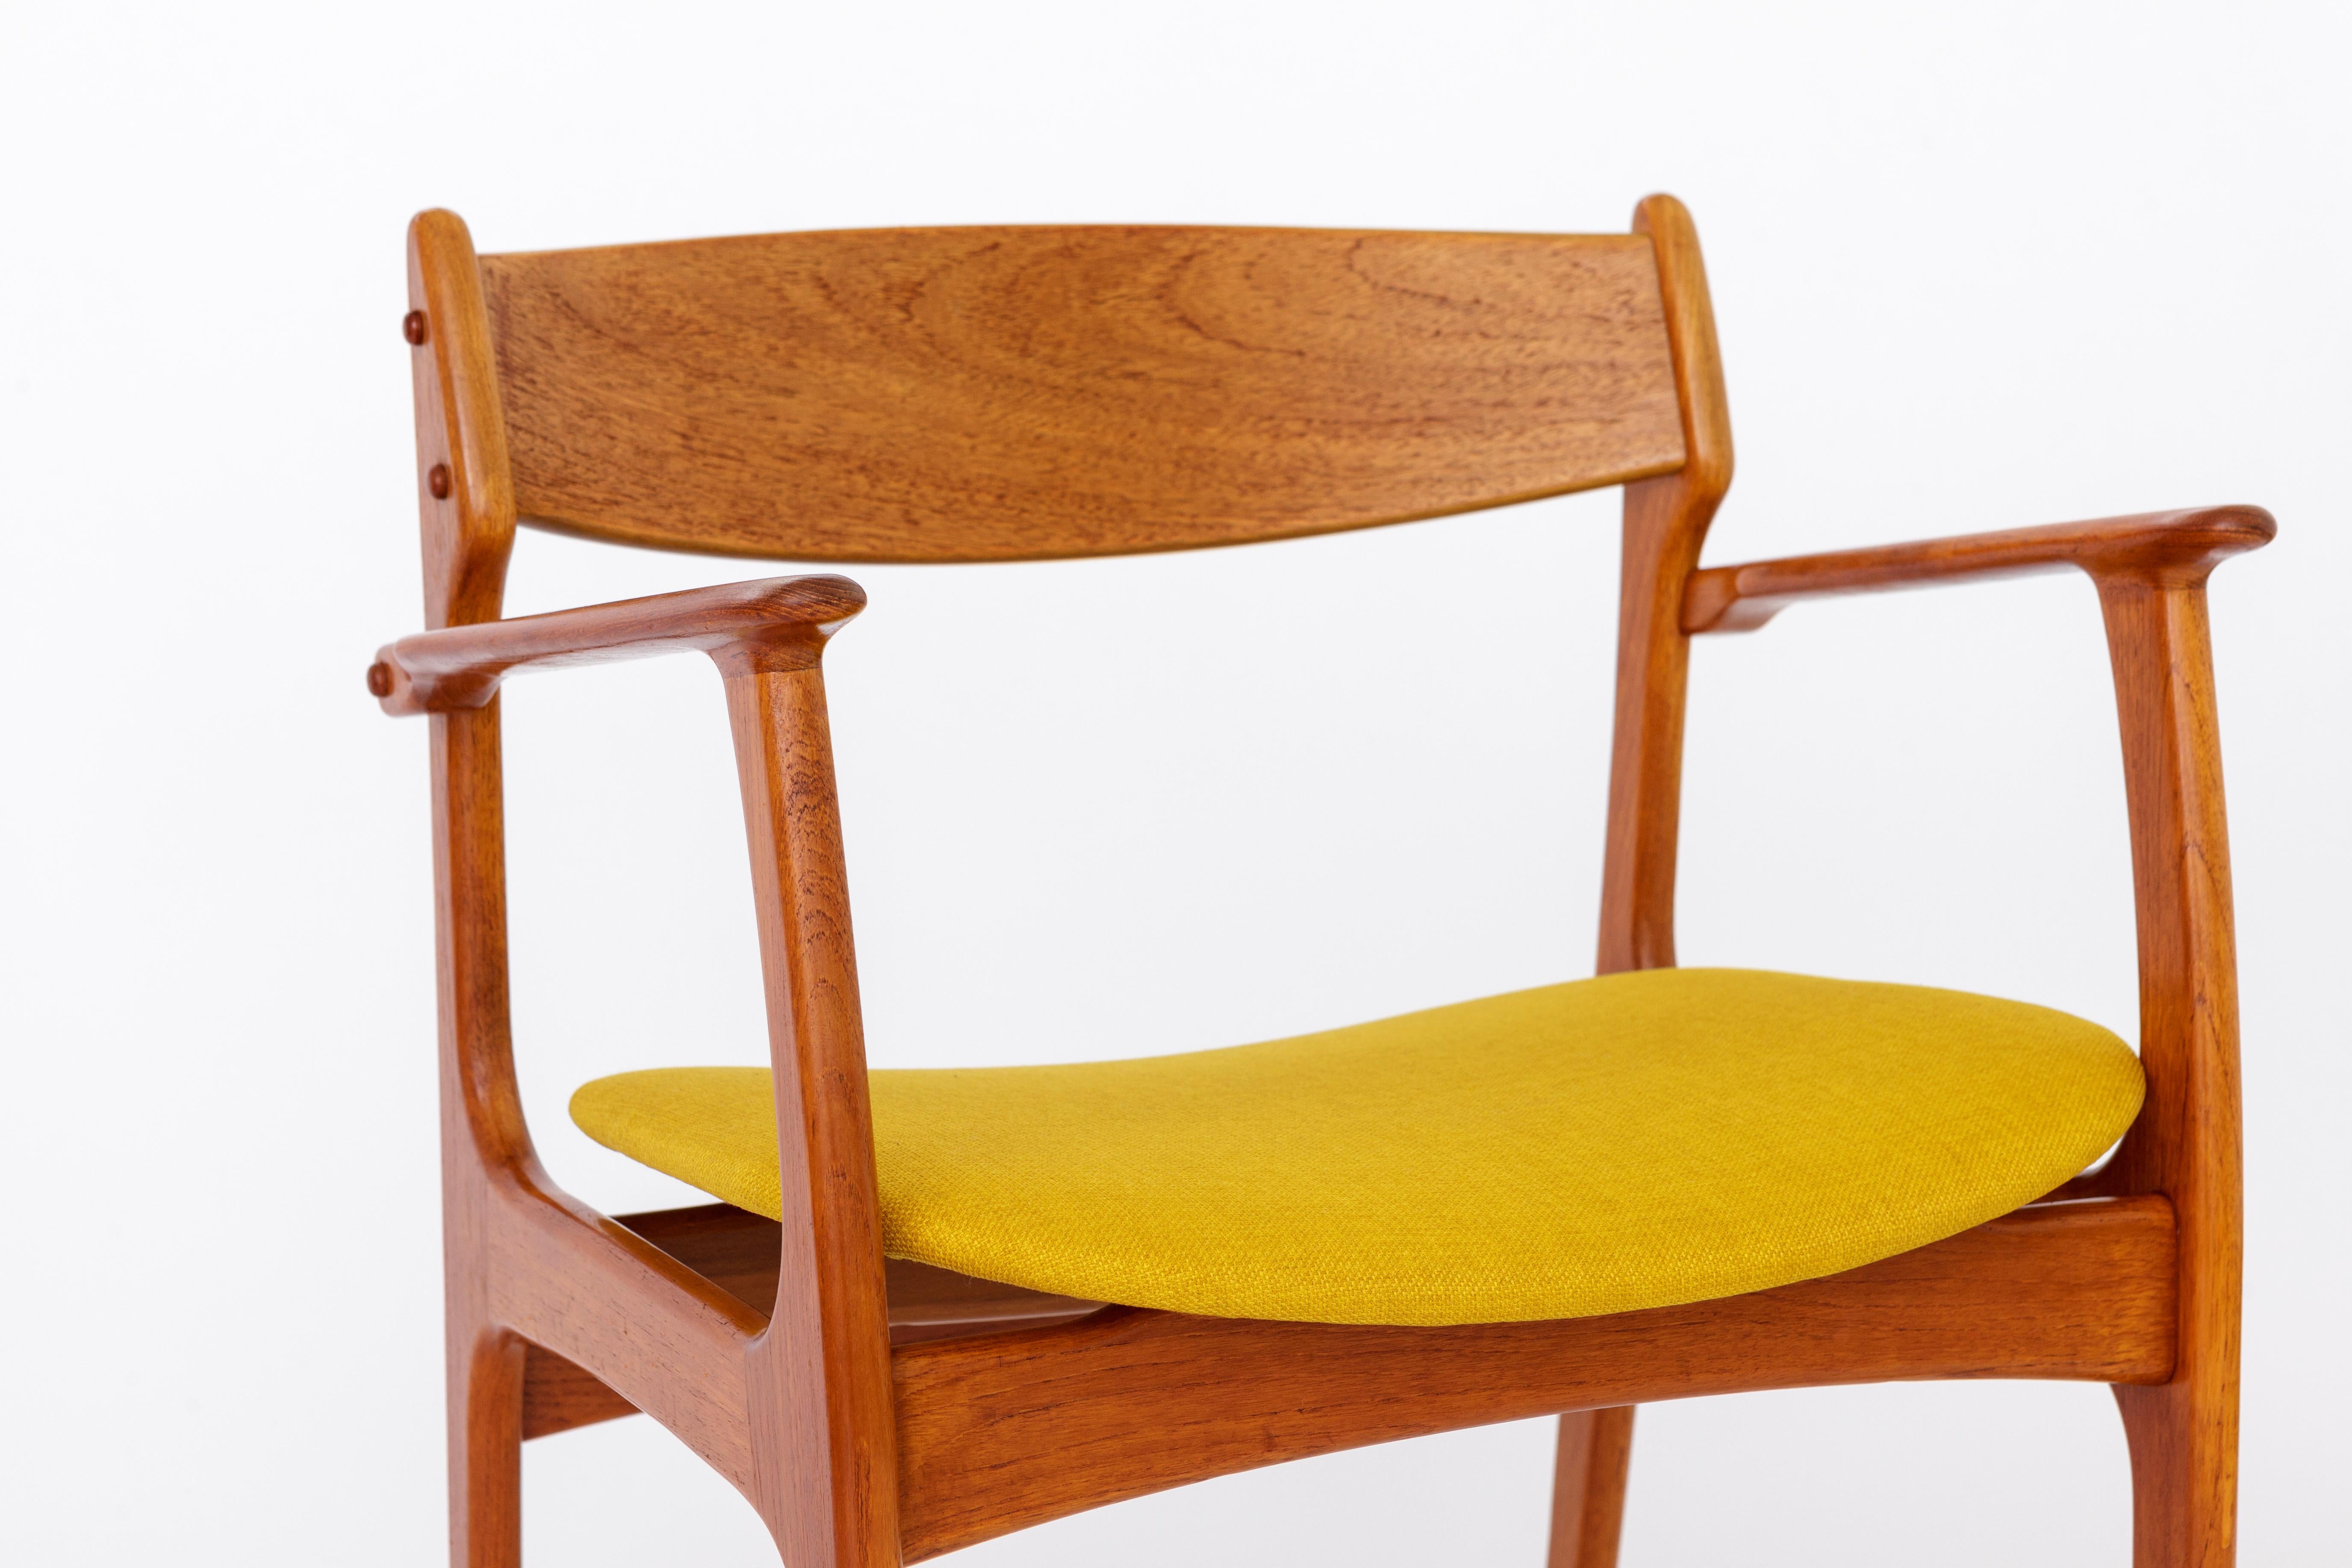 Armchair from the 1960s, designed by Erik Buch, Denmark. 

Sturdy teak wood chair frame. Refurbished and oiled. 
Reupholstered textile seat cover. 